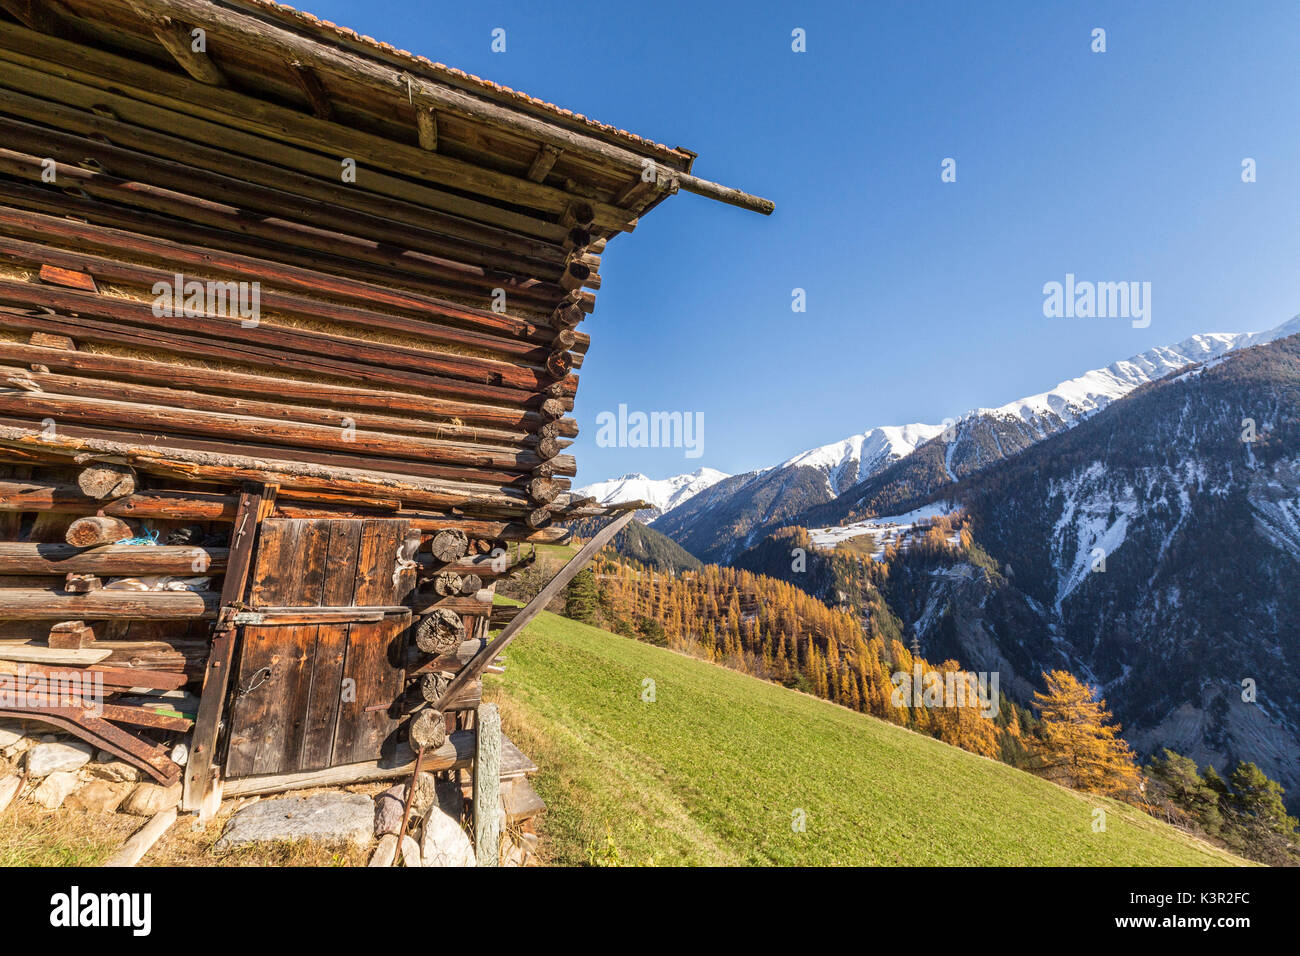 Wooden cabin surrounded by colorful woods and snowy peaks Schmitten Albula District Canton of Graubünden Switzerland Europe Stock Photo